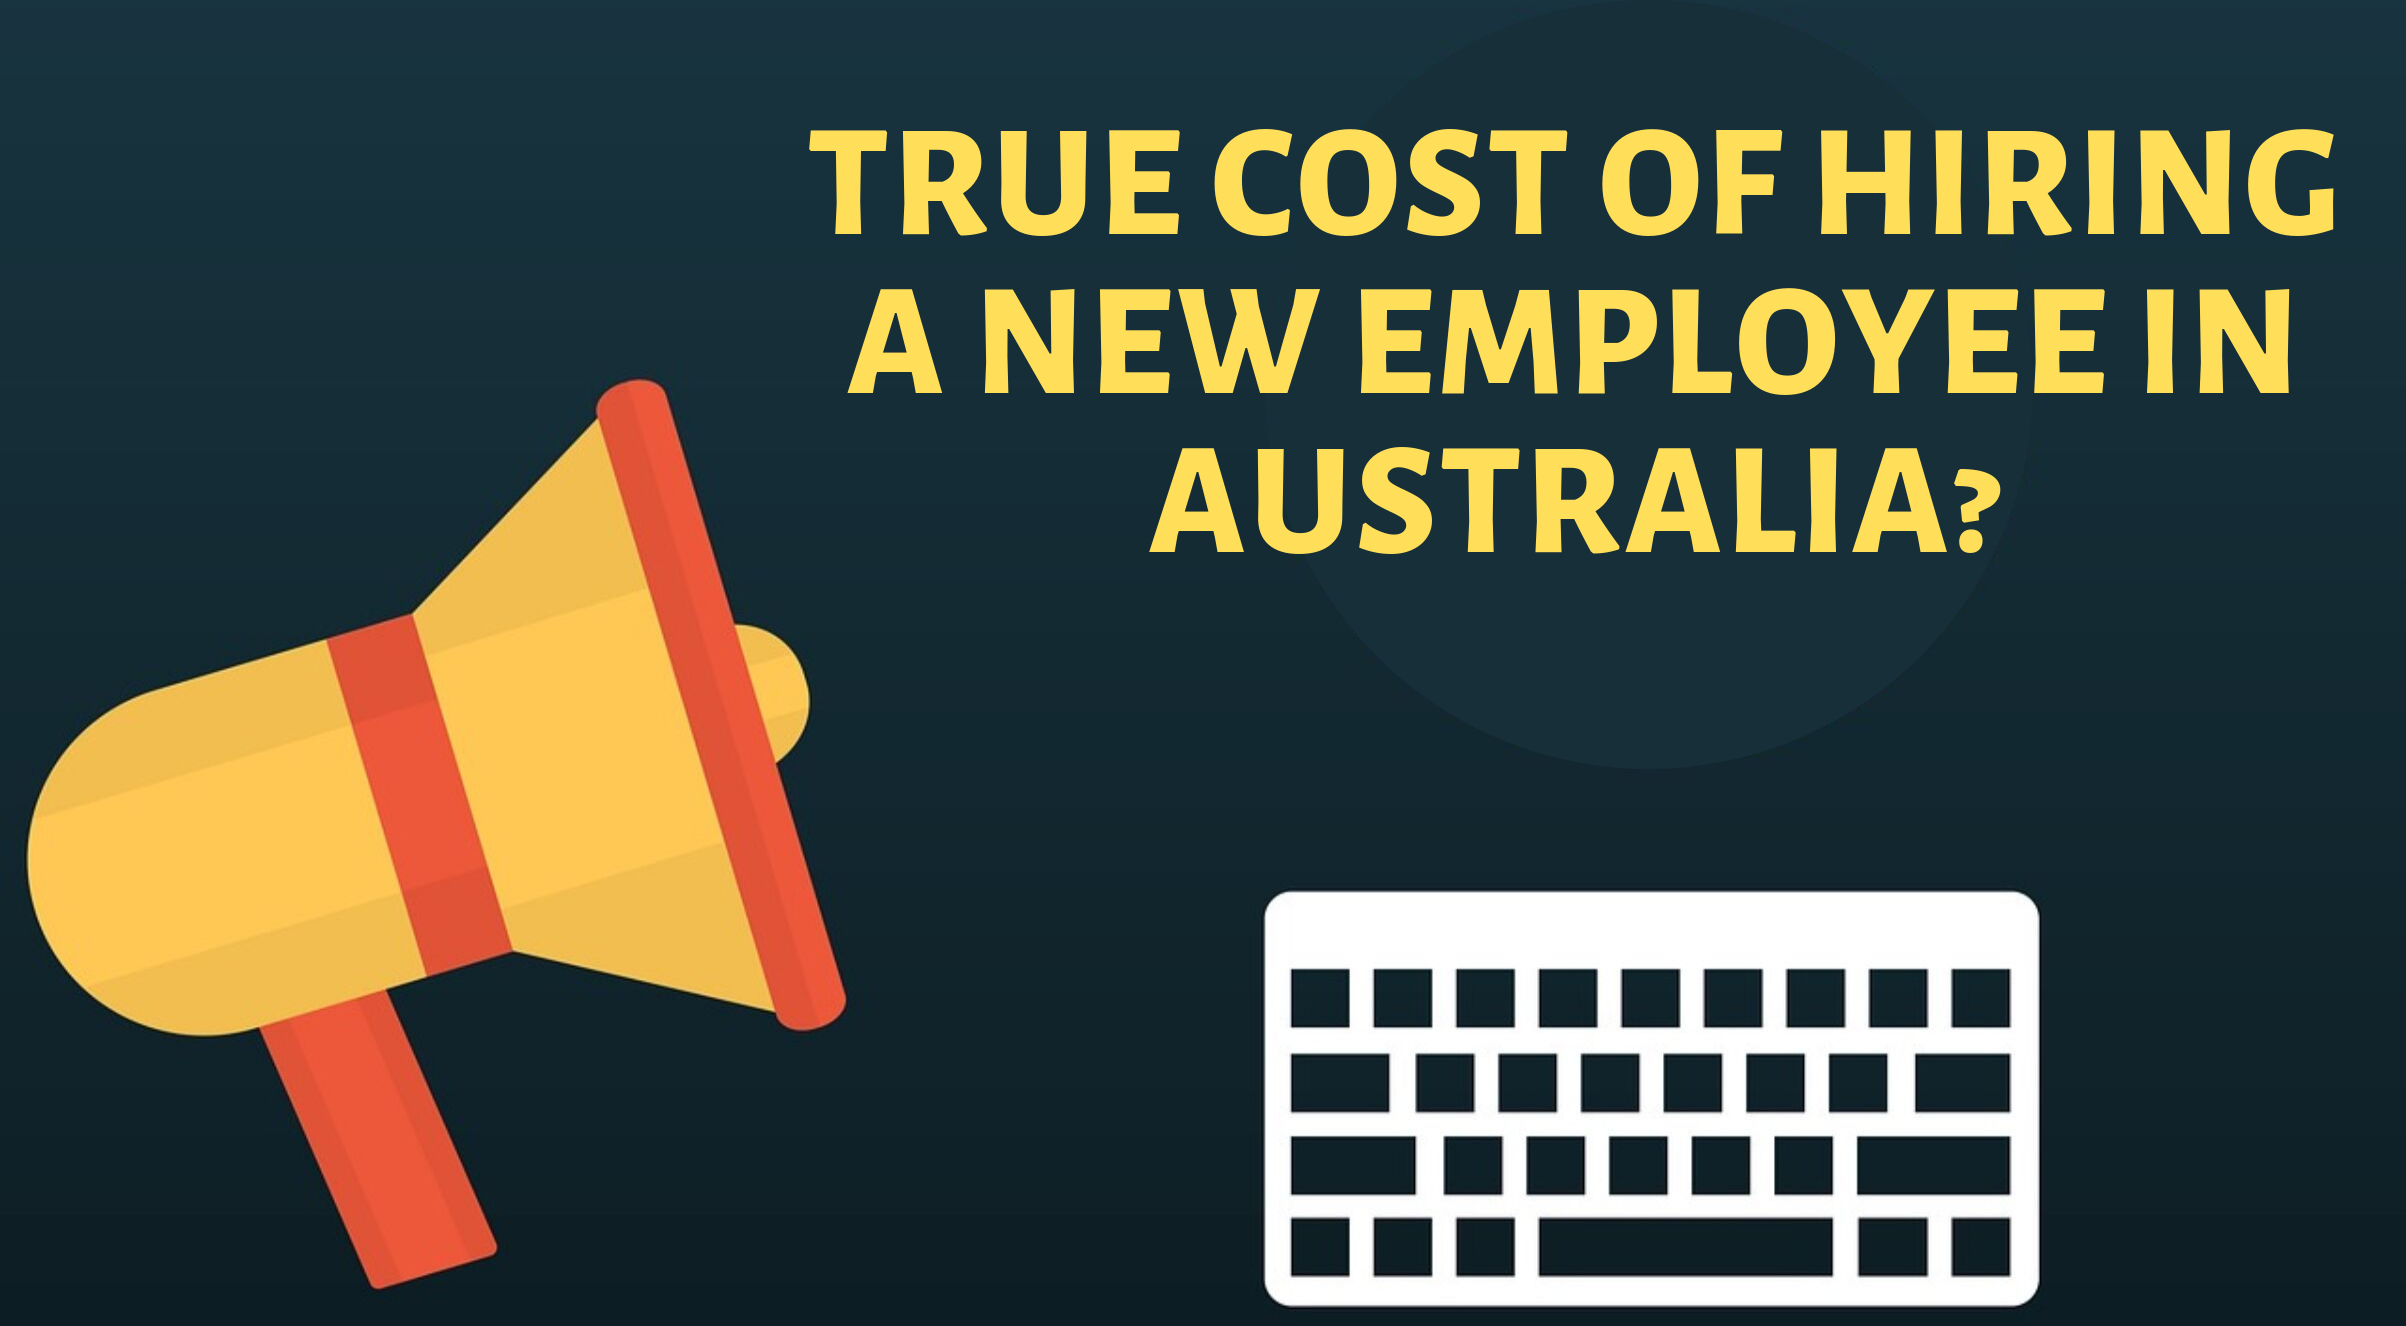 WHAT IS THE TRUE COST OF HIRING A NEW EMPLOYEE IN AUSTRALIA?